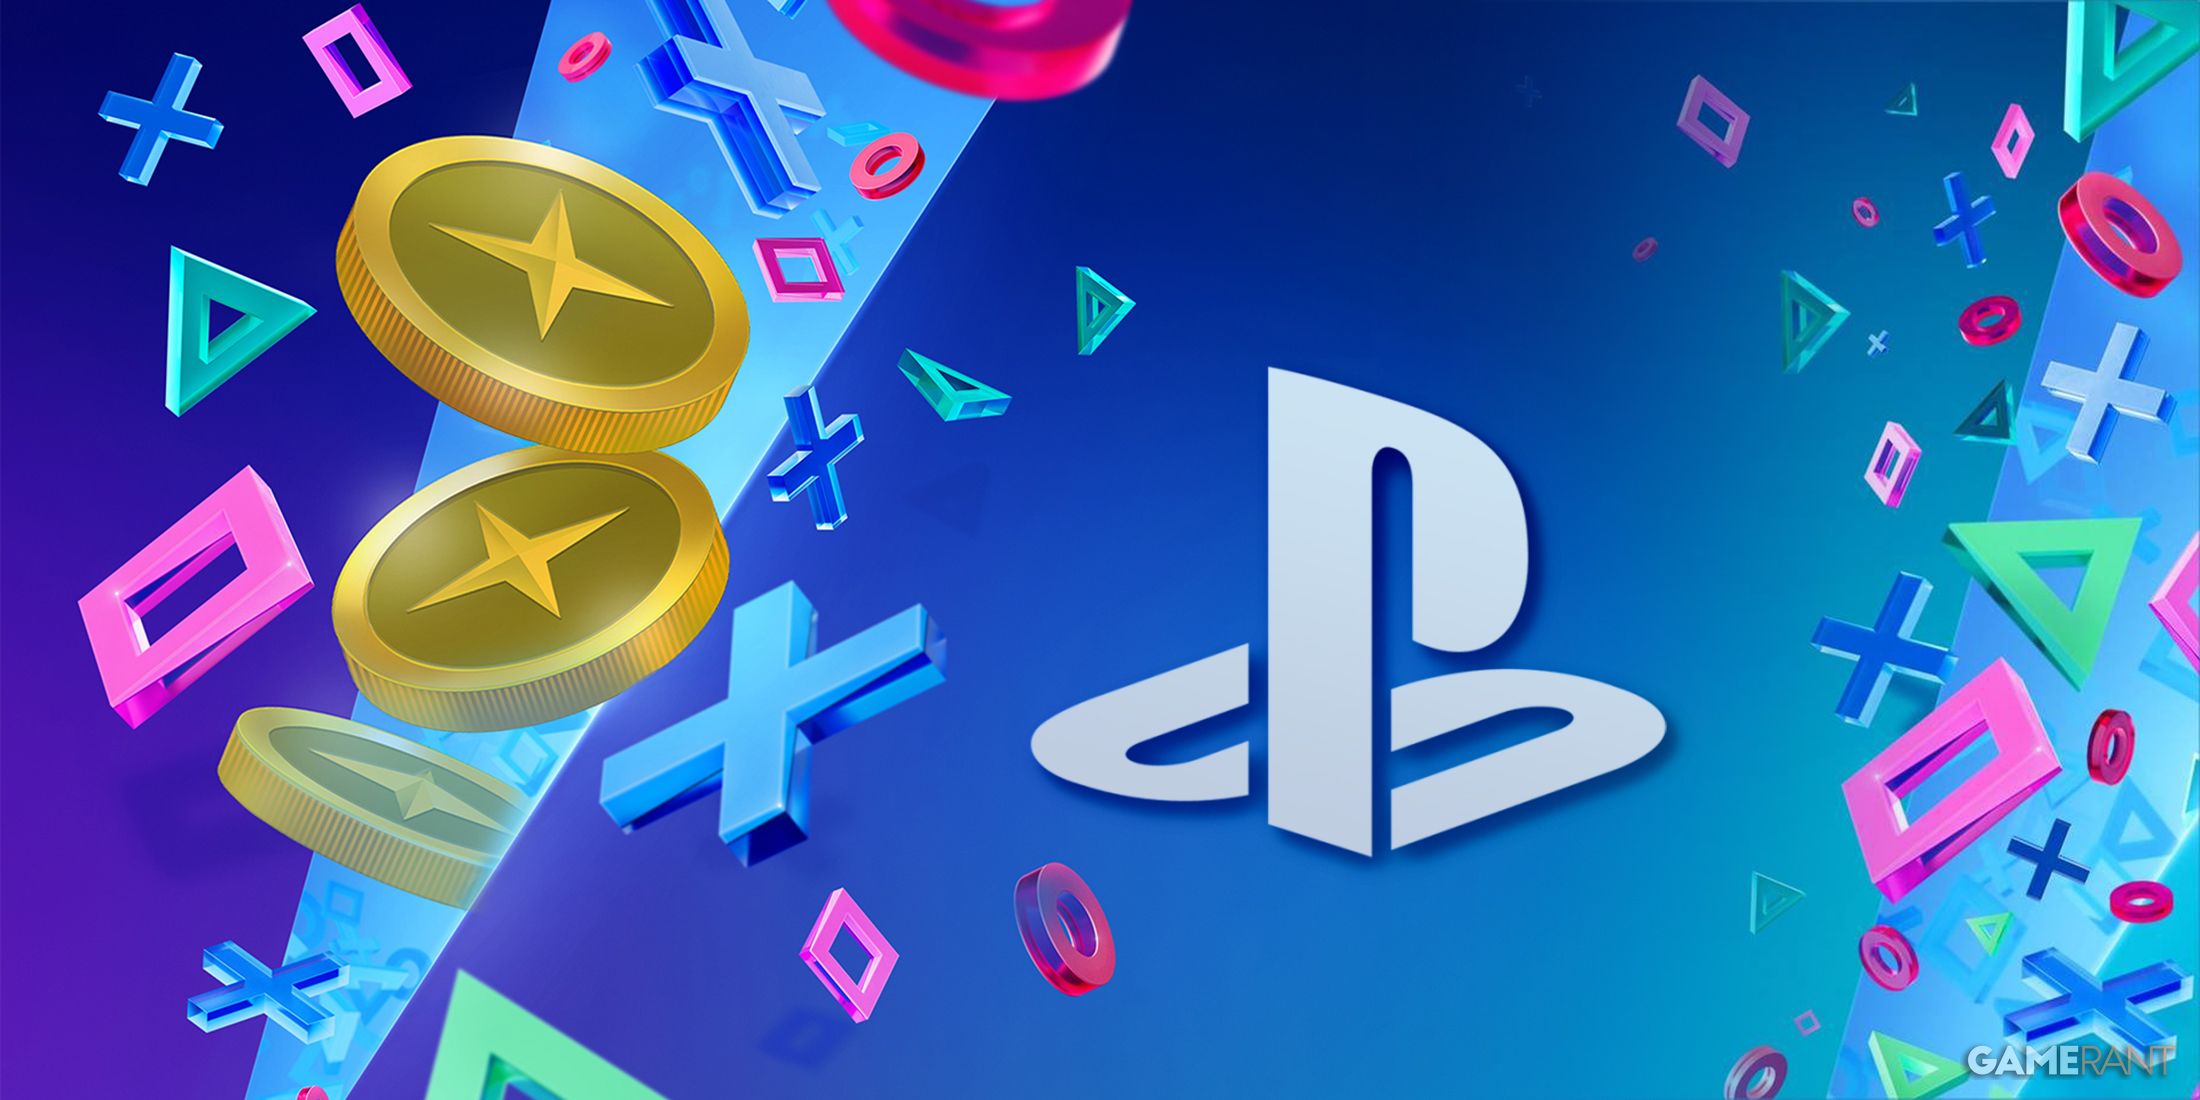 playstation logo on days of play background